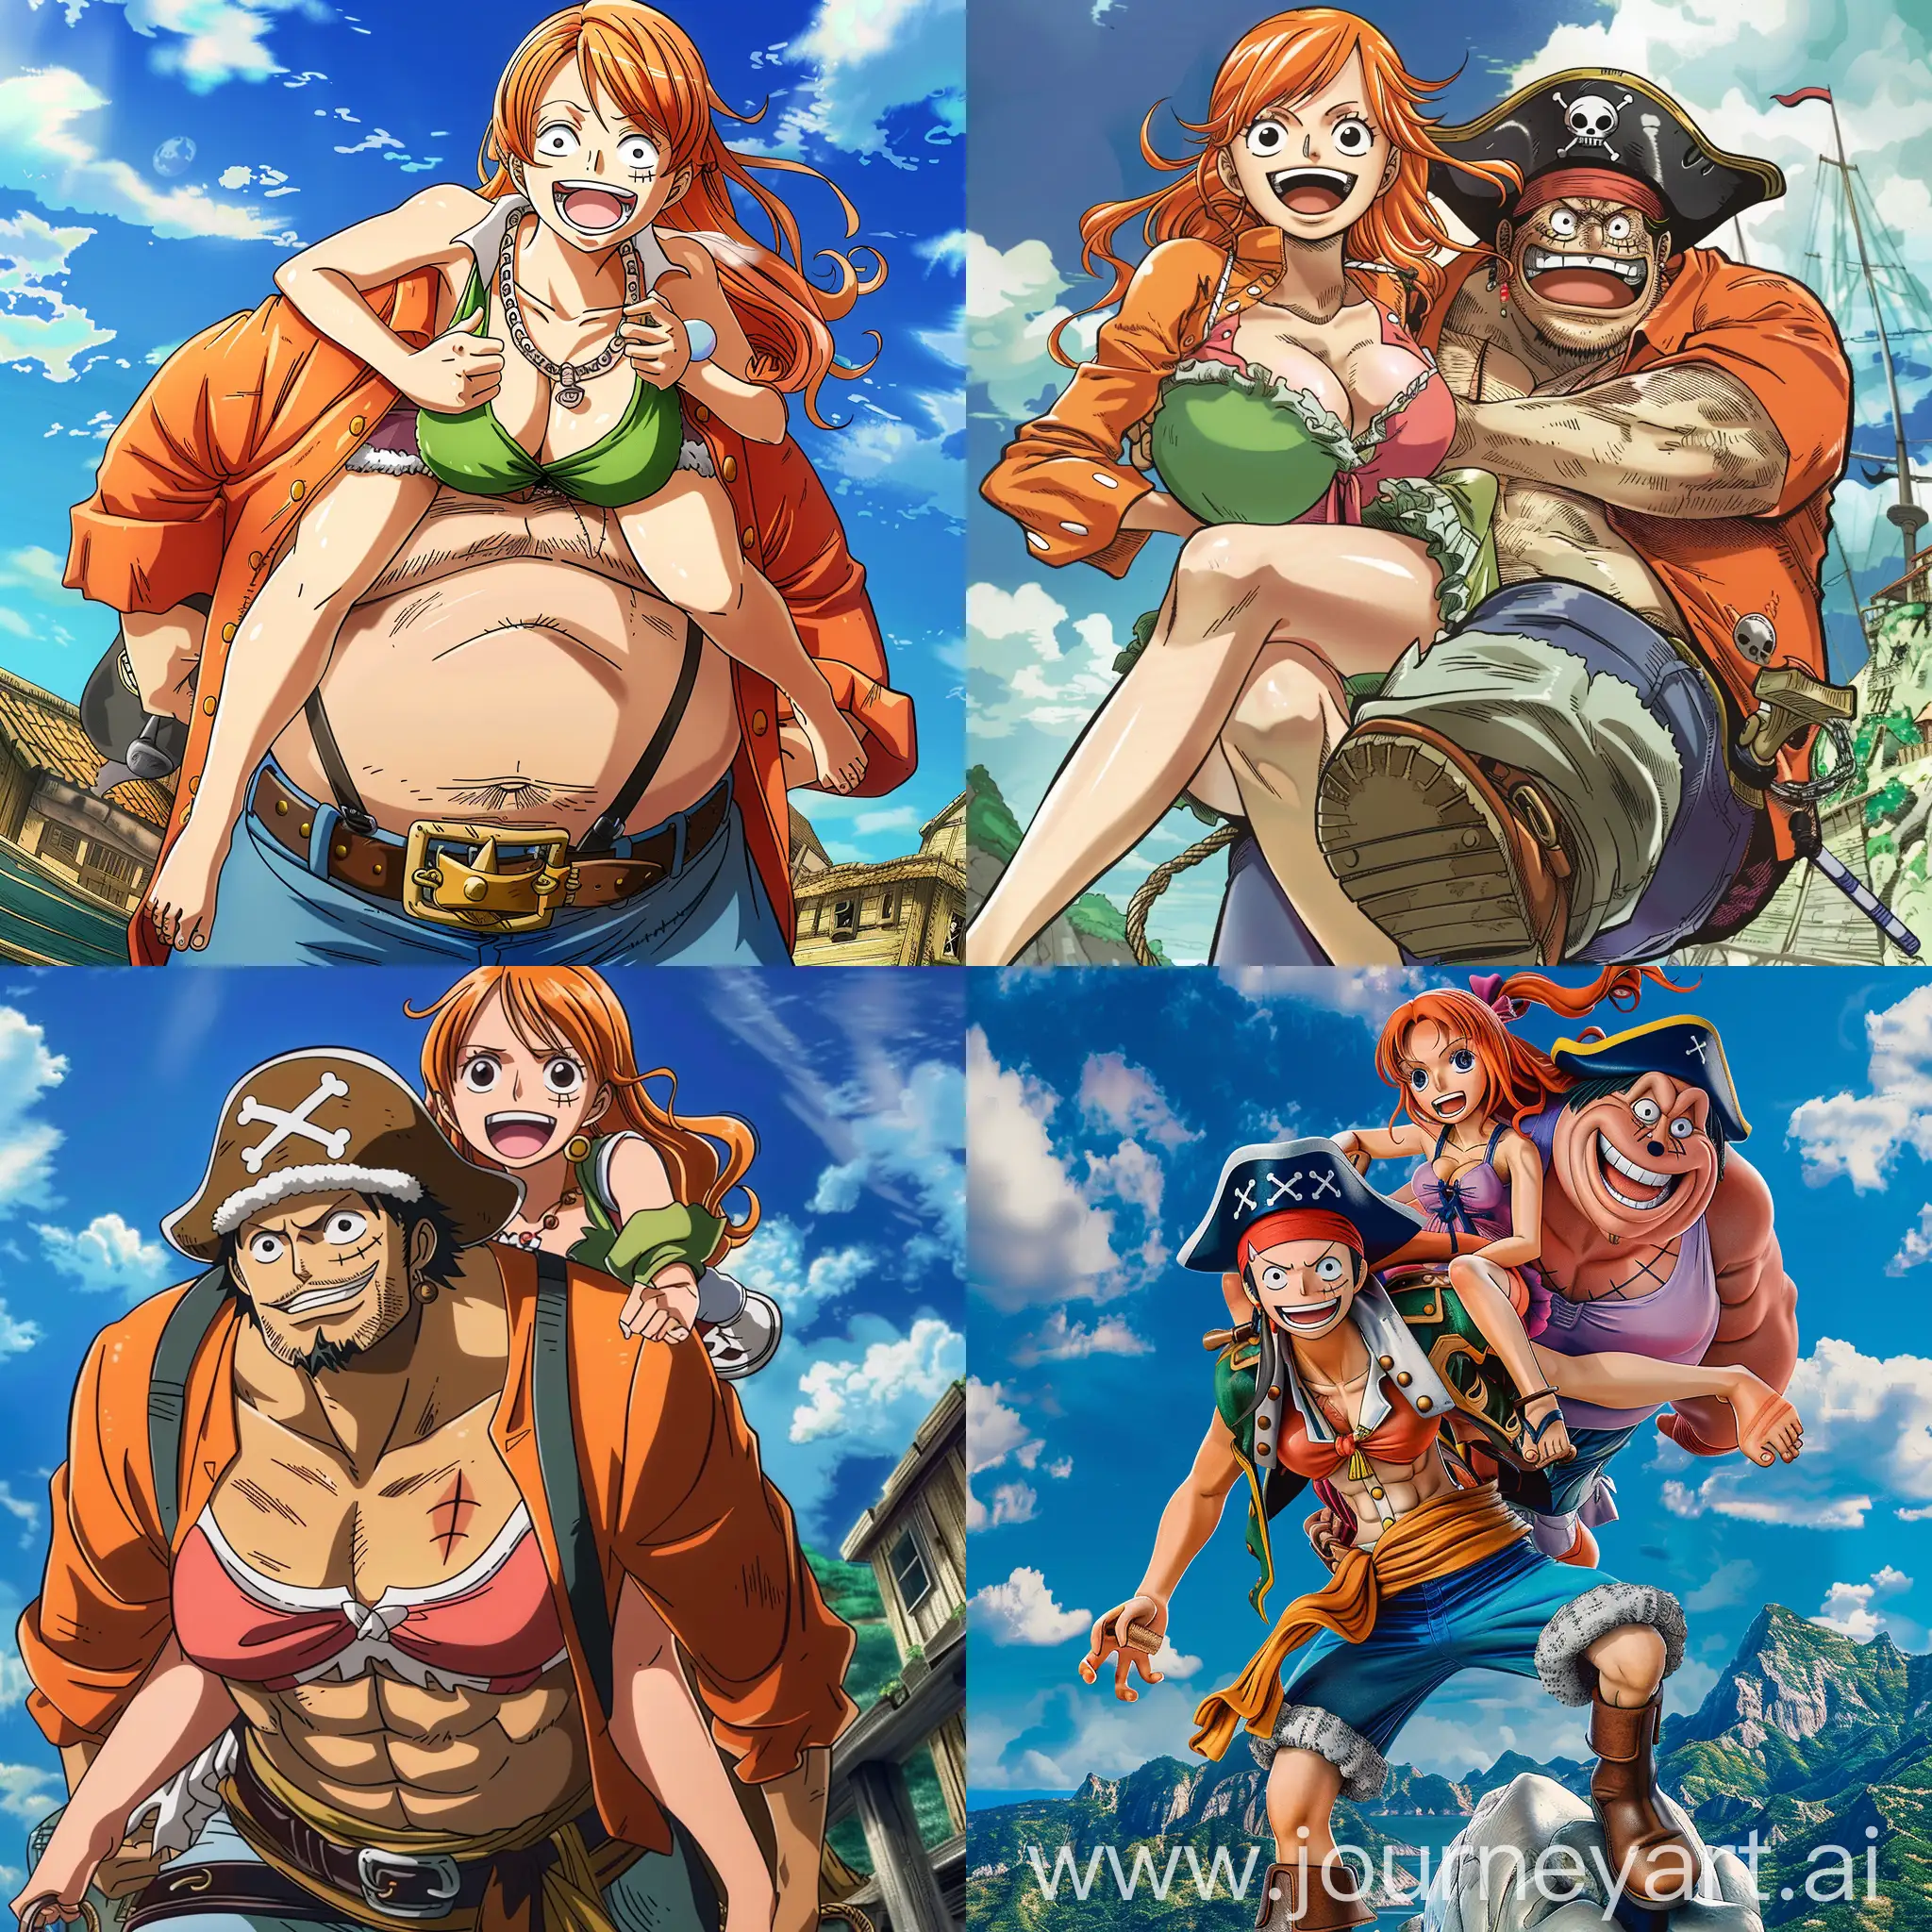 create a pic of Nami post timeskip in one piece getting piggybacked by a fat  pirate